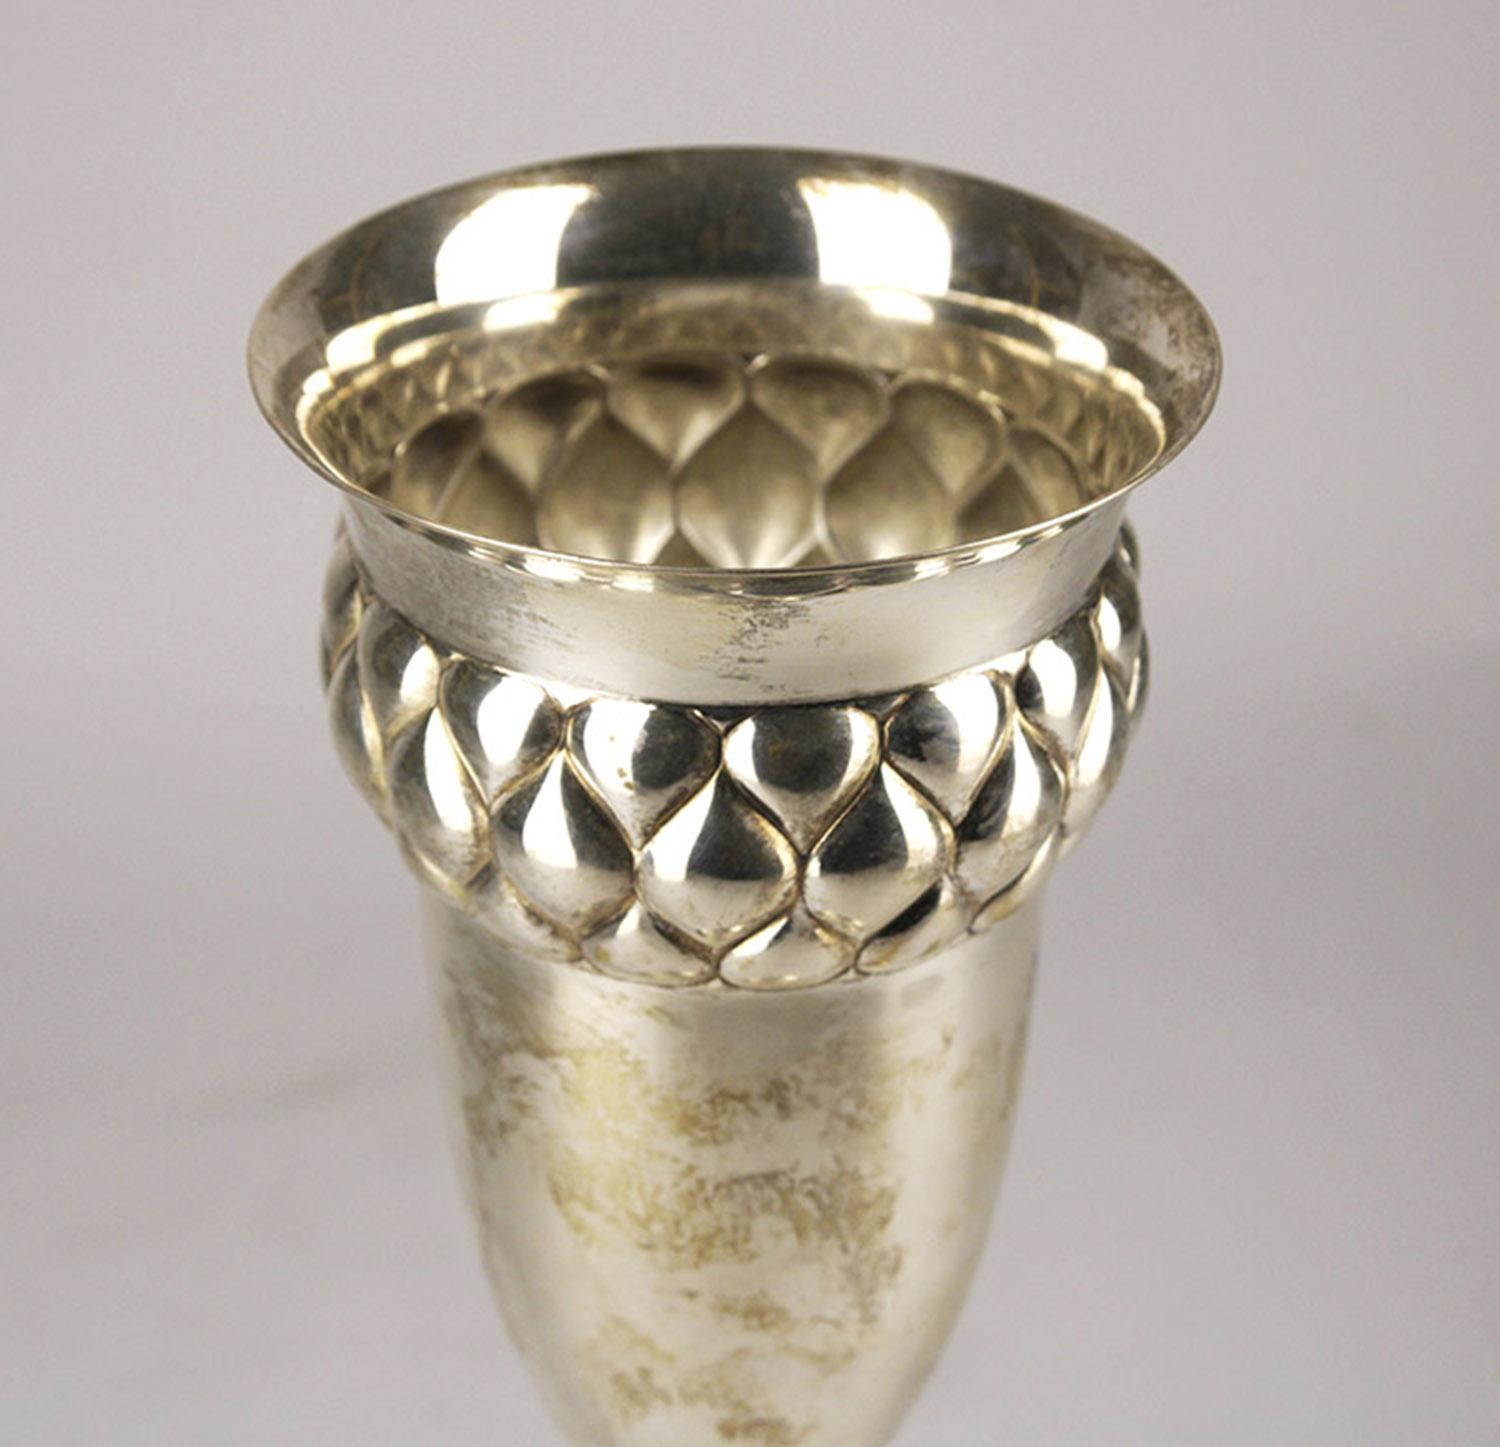 Jugendstil German Silver Plated Chalice-Shaped Presentation Trophy Vase by WMF In Fair Condition For Sale In North Miami, FL